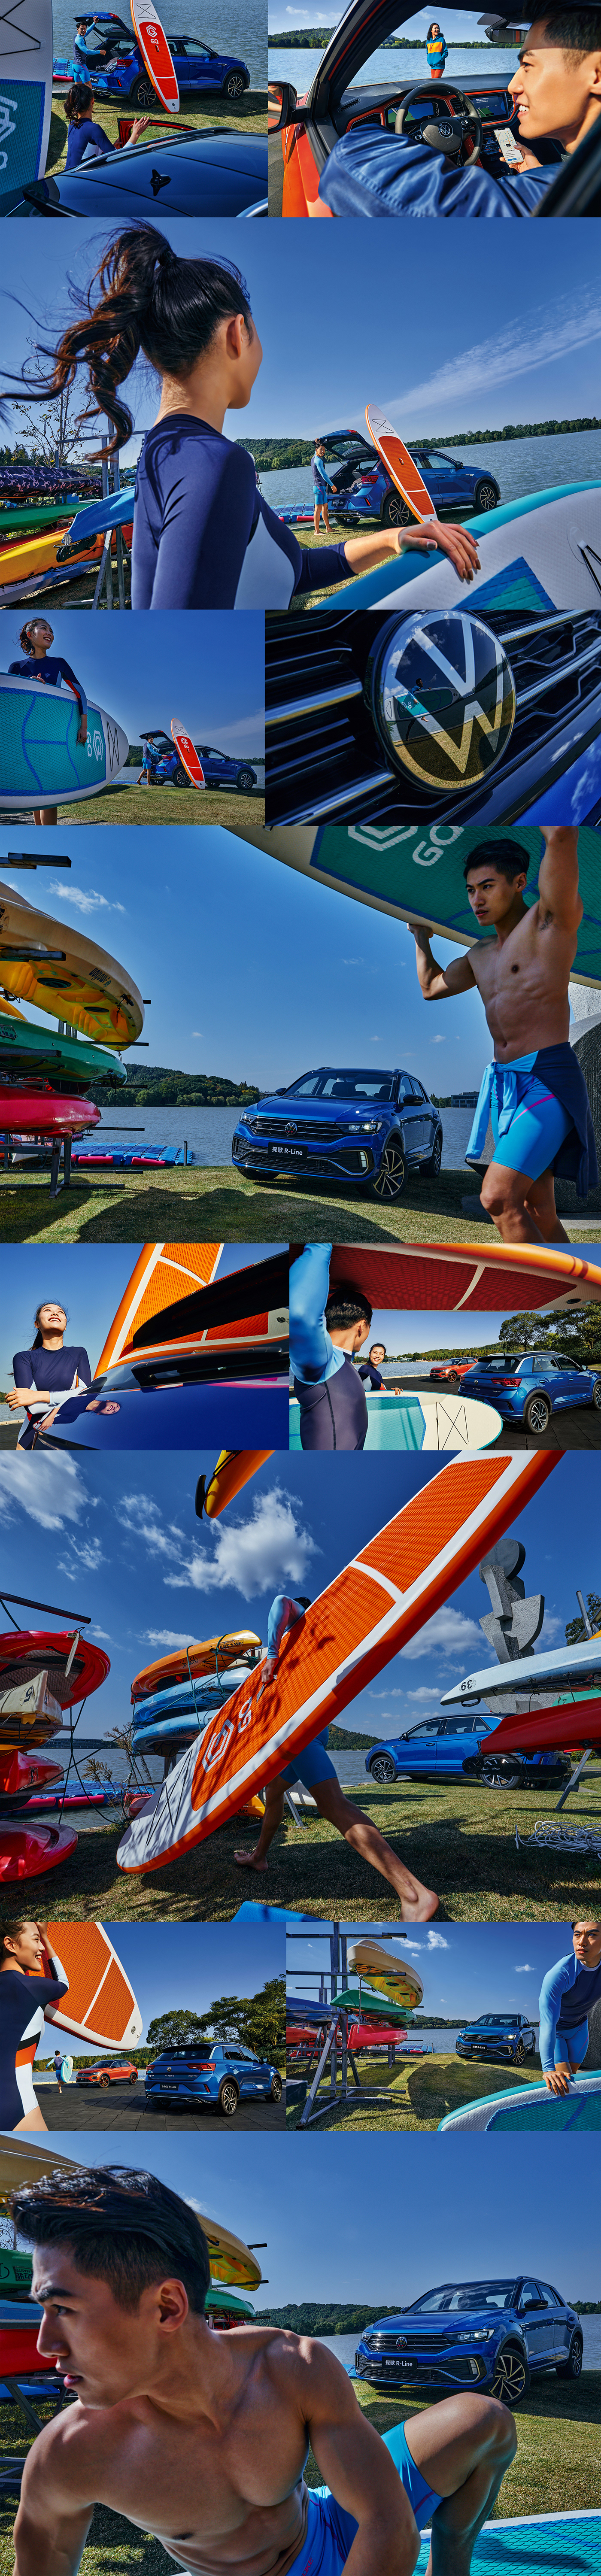 automotive   Cars china faw paddle board R-Line T-roc VW weekend